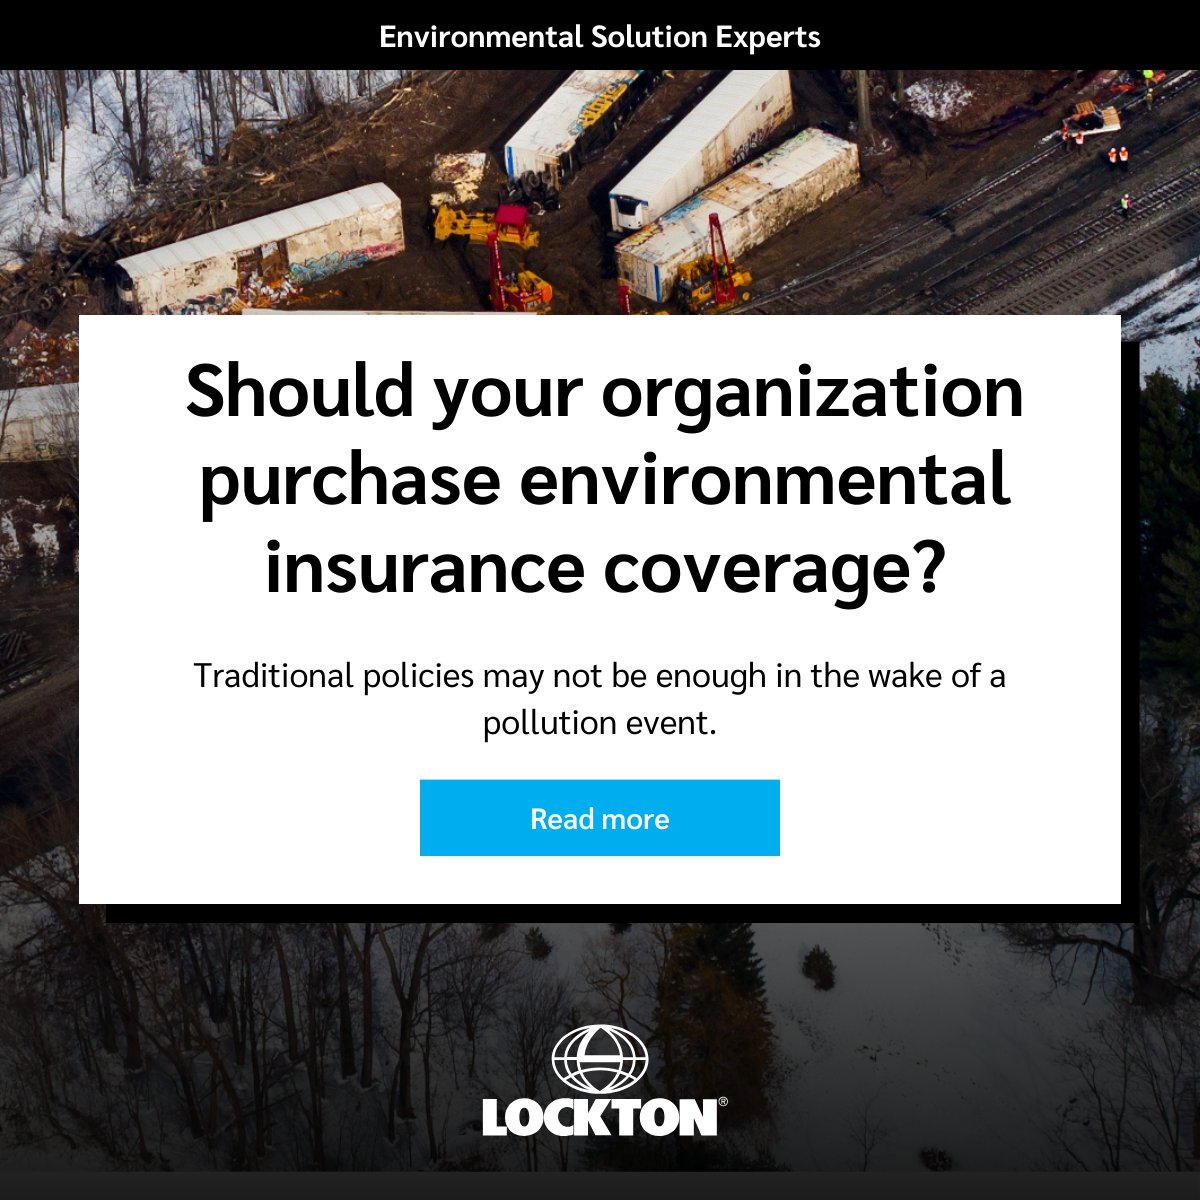 In the wake of a pollution event, traditional insurance policies may have gaps in coverage. Learn how environmental insurance policies offer more robust protection. global.lockton.com/us/en/news-ins…